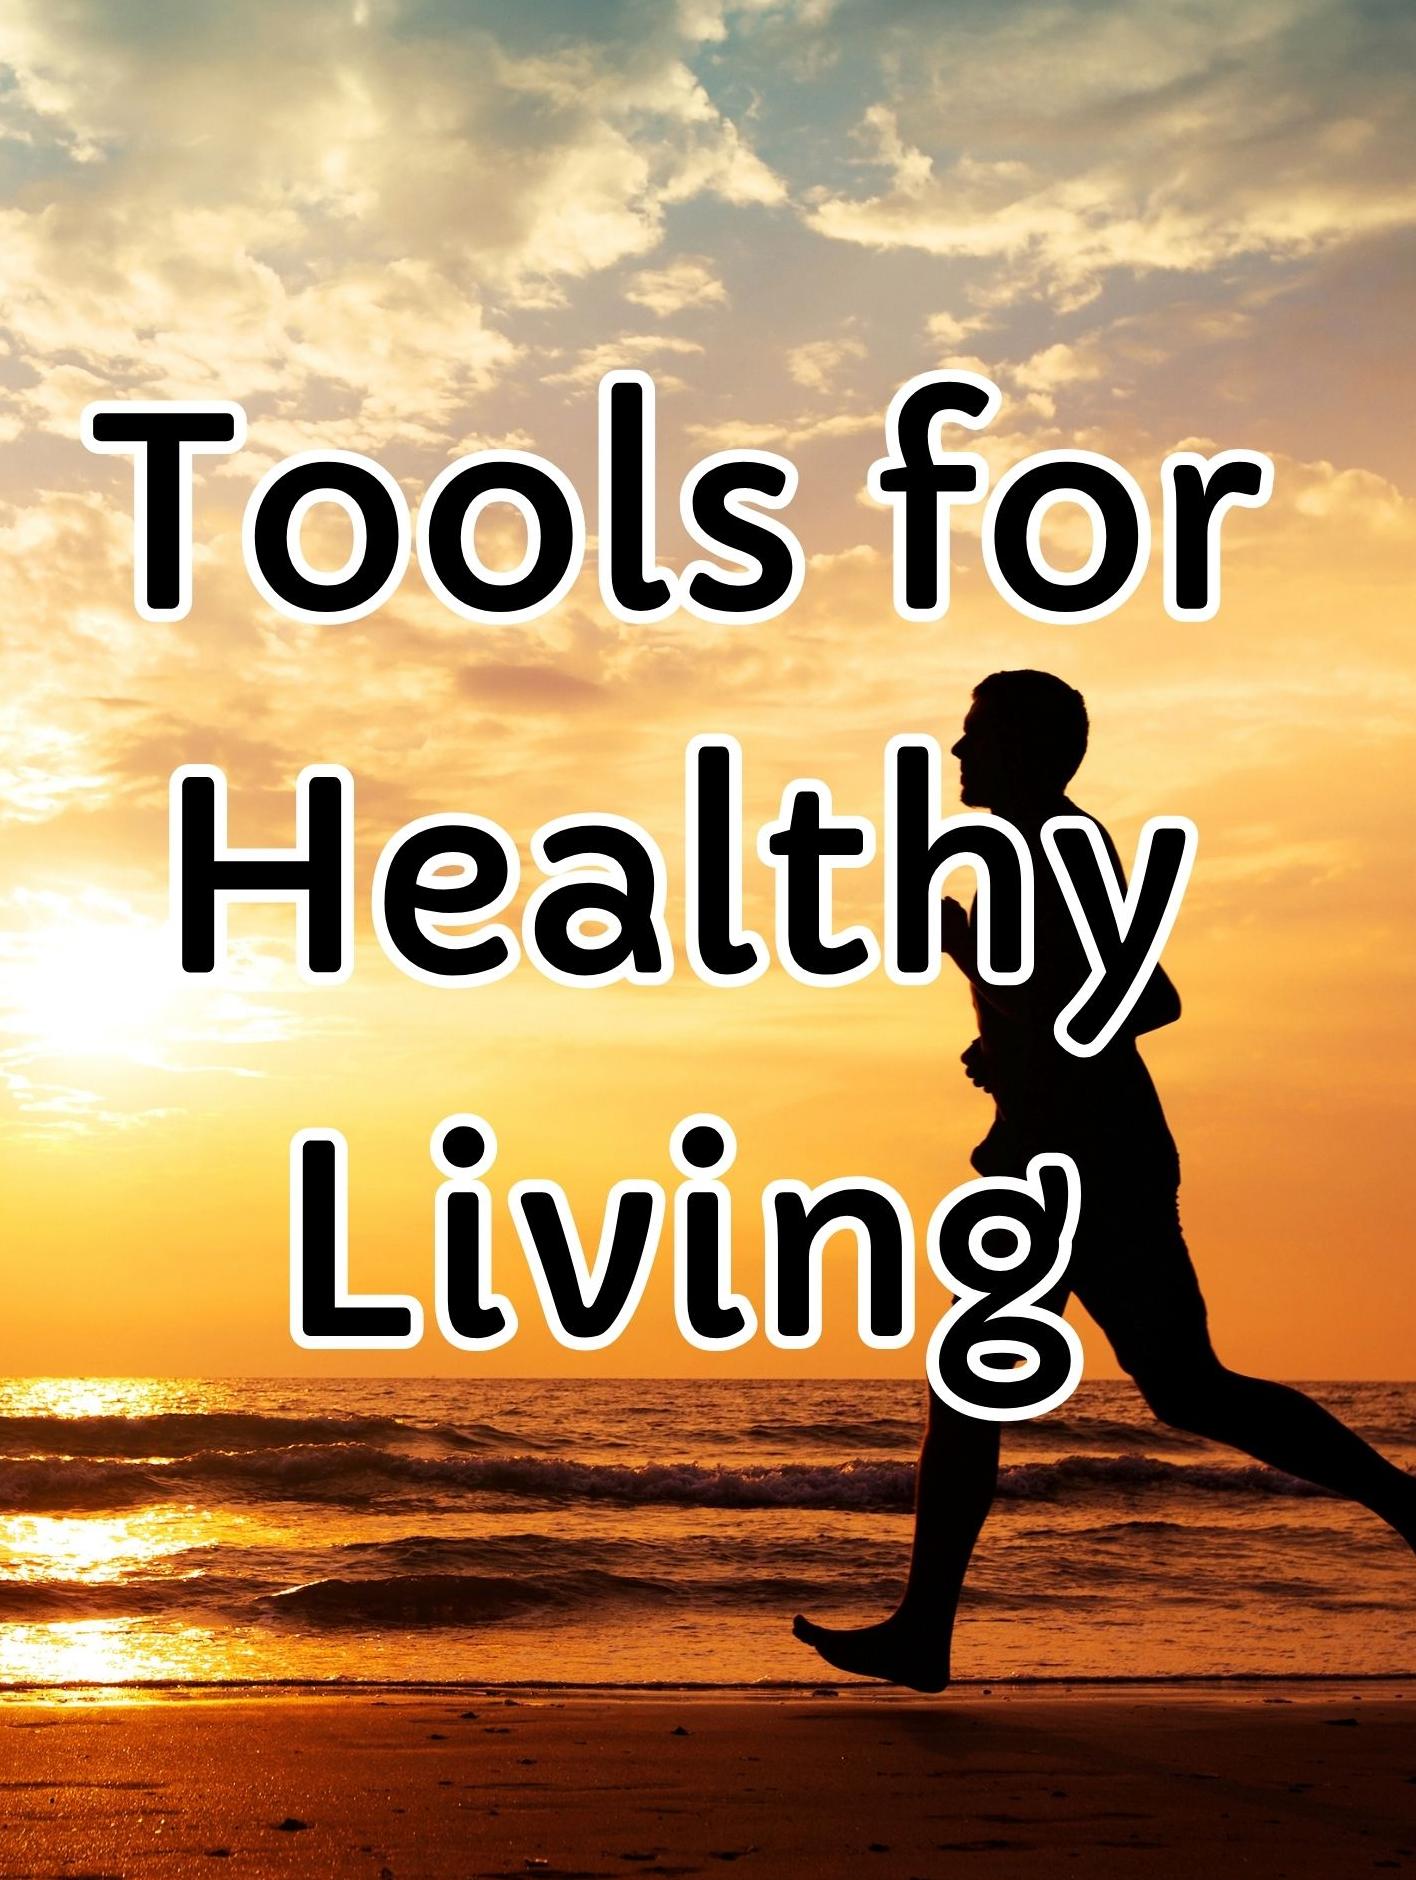 Man jogging at sunset with text: "Tools for Healthy Living"